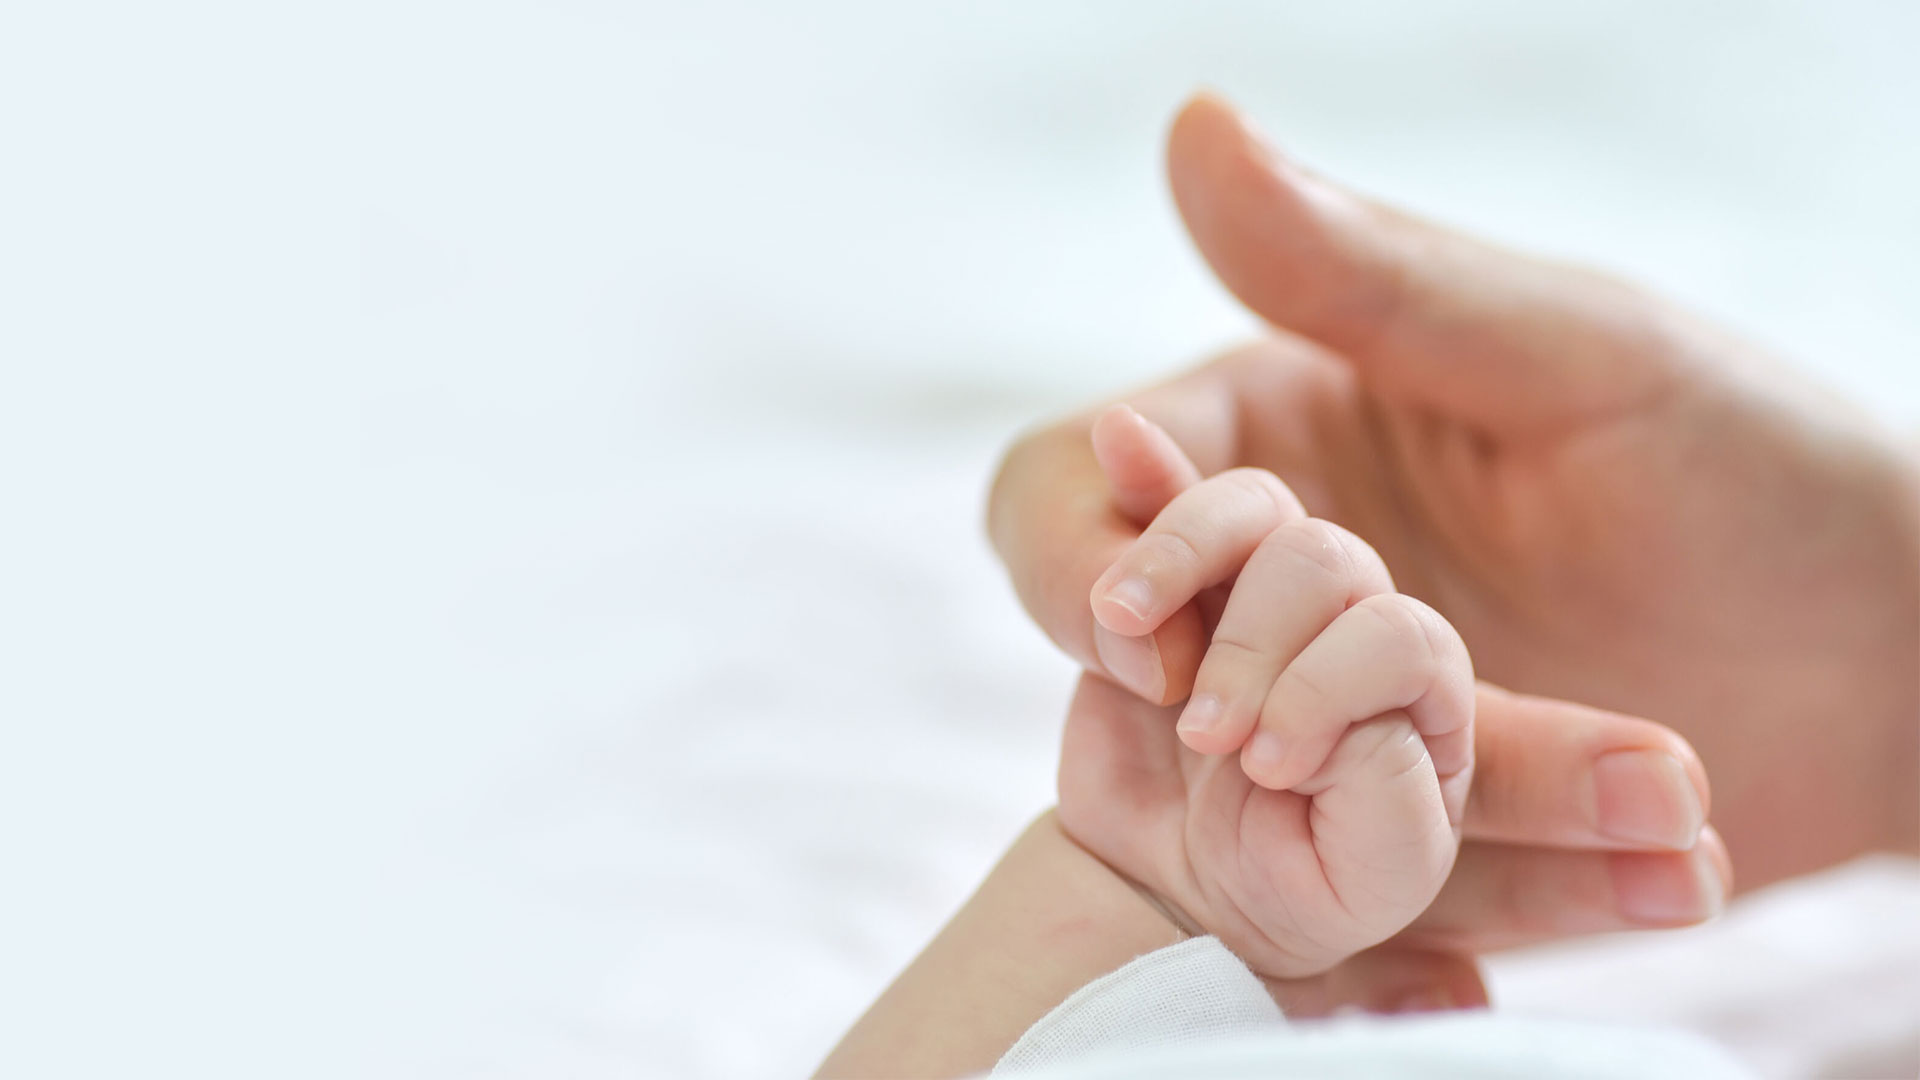 Mother's hand holds baby's hand against a white background.